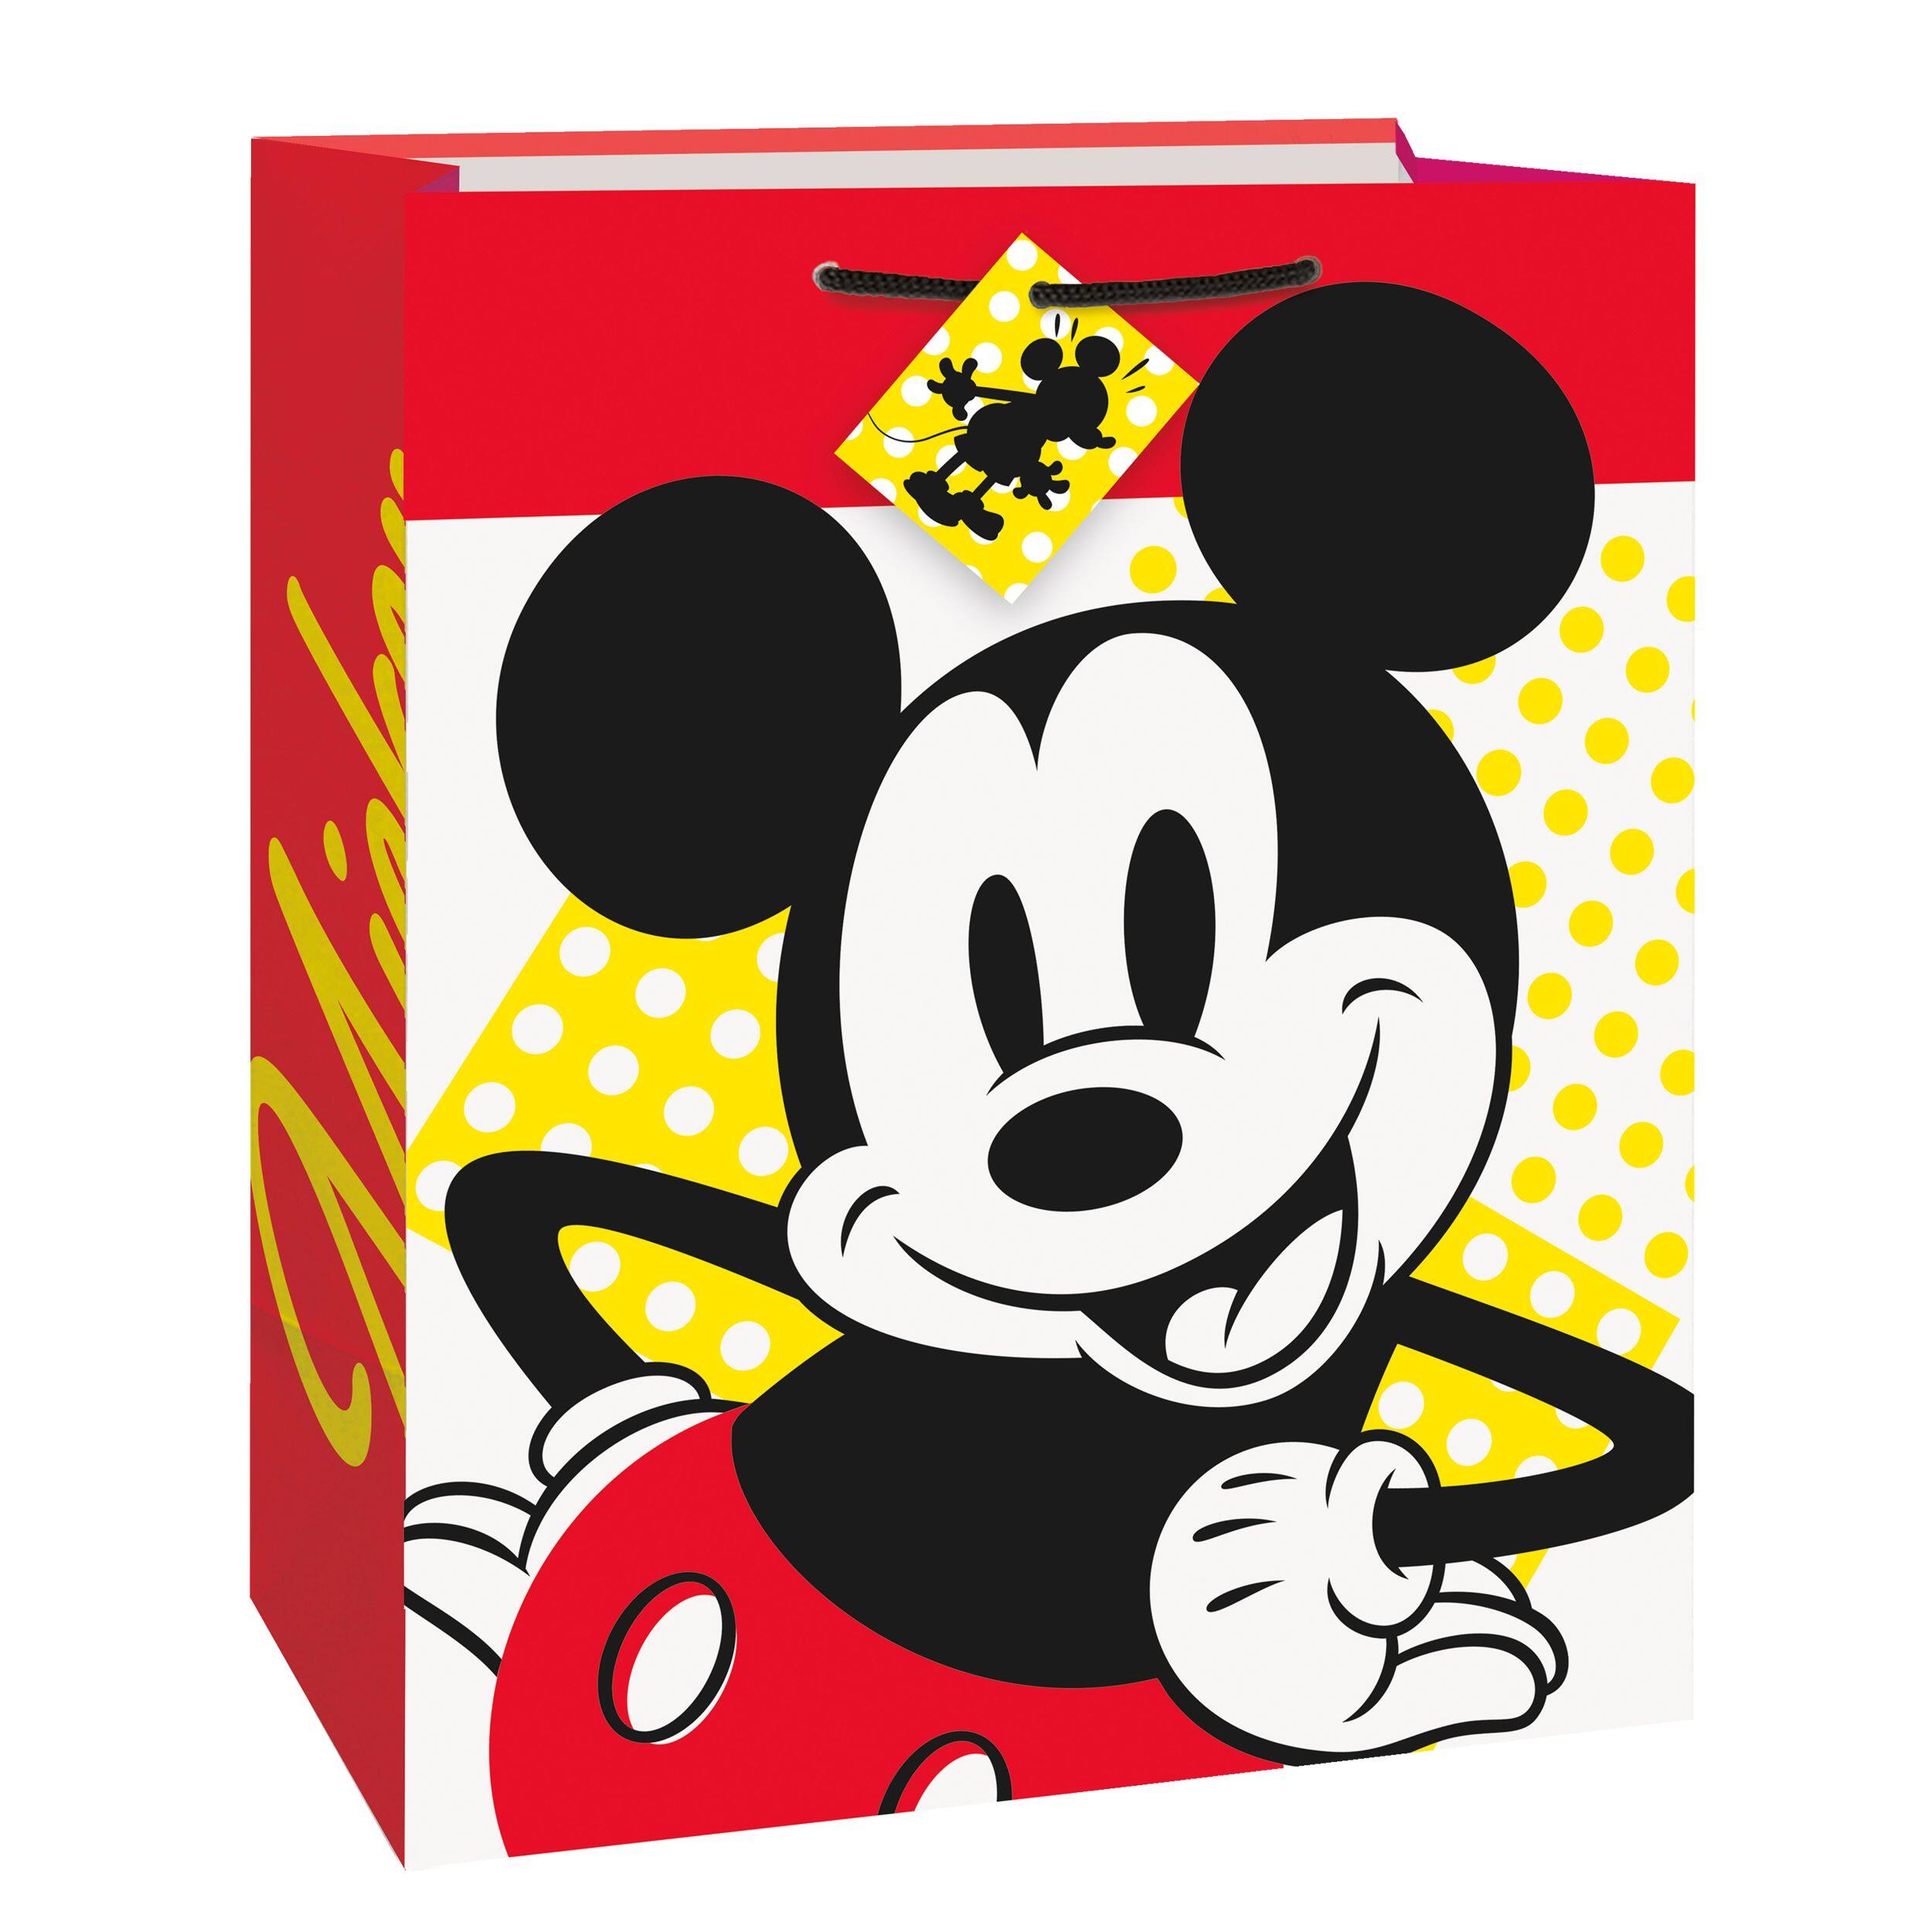 CUSTOMIZED GIFT BAGS - Party Favor Bags - Goodie Bags - Mickey Mouse - Minnie  Mouse - Personalized Party Favors - Print - Shipped